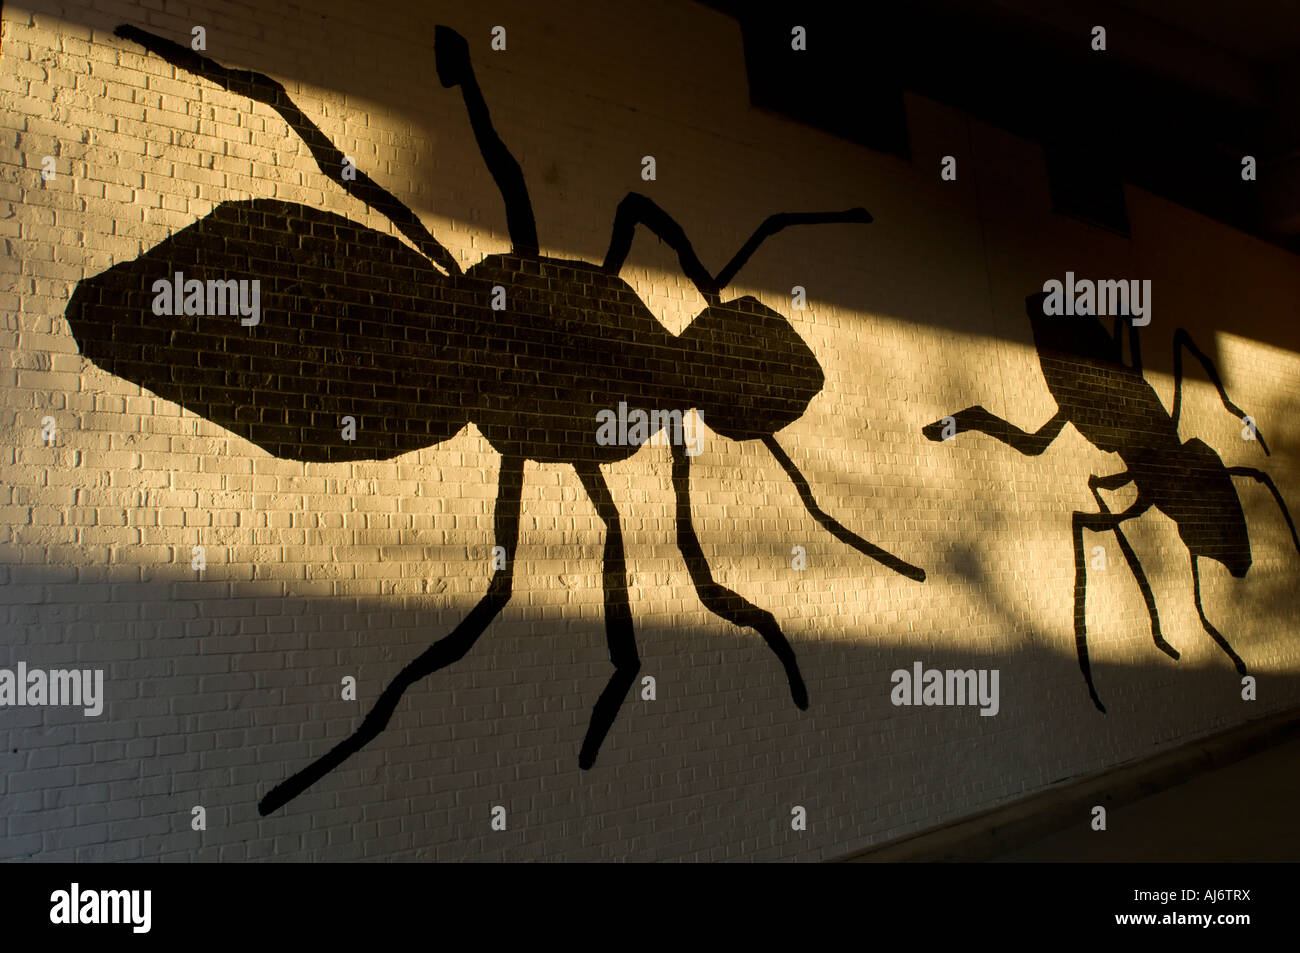 Giant ants painted on a brick wall Stock Photo